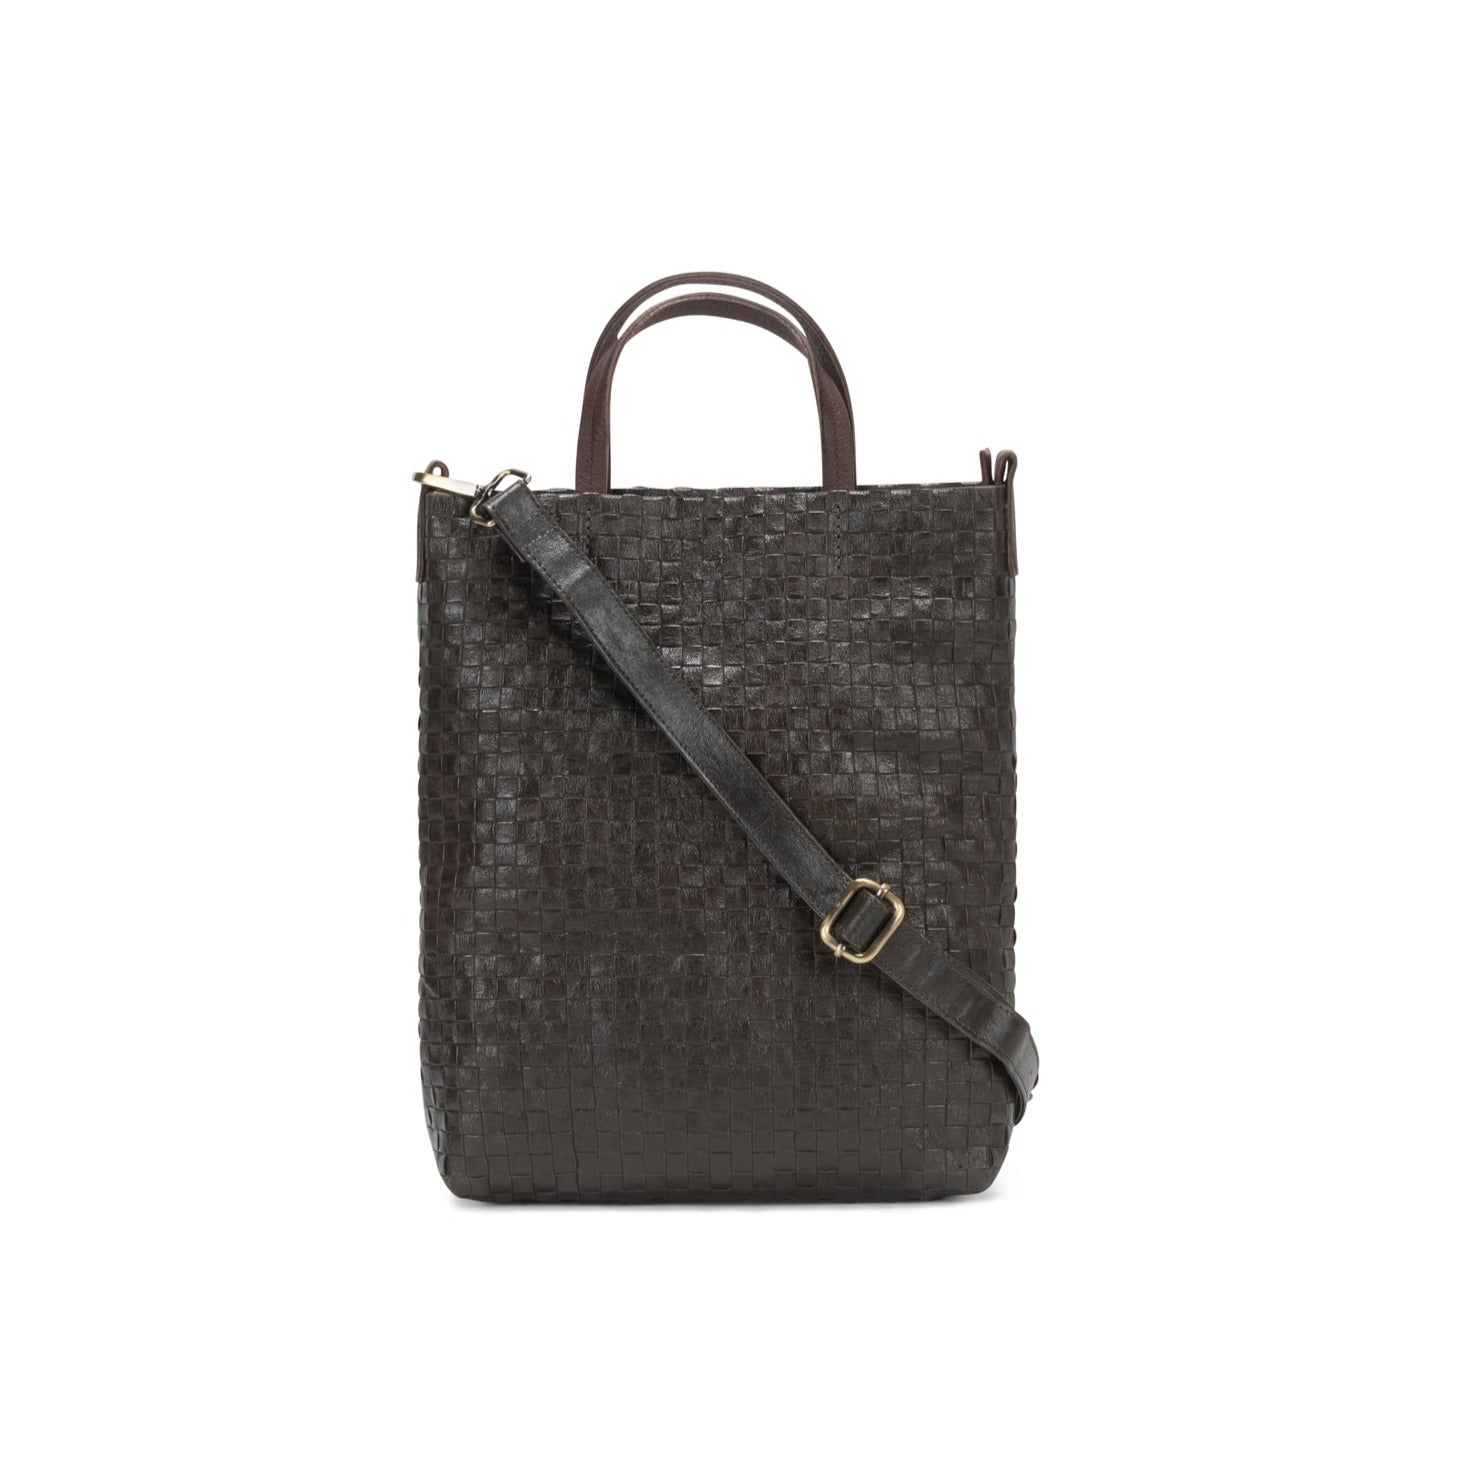 A woven washable paper tote bag is shown from the front angle. It features two top handles and a long adjustable shoulder strap. It is chocolate brown in colour.